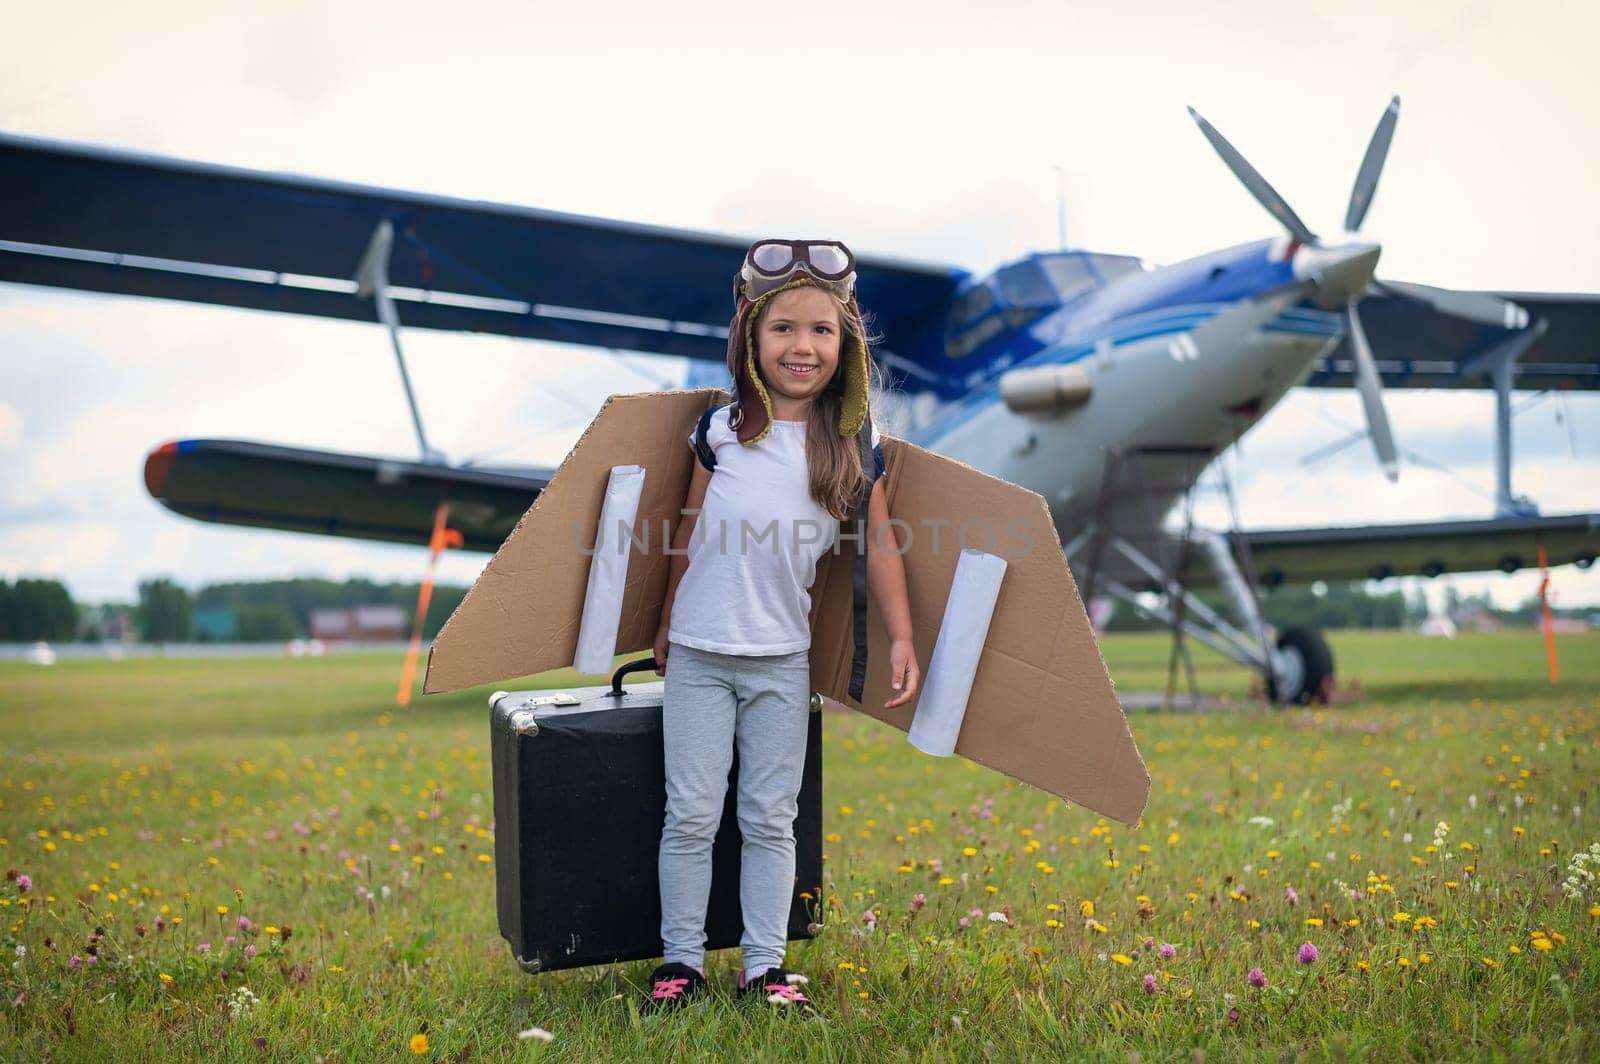 A little girl in a pilot's costume sits on a retro suitcase at the airport waiting for the departure of the flight. A child in a hat and glasses is going on a trip by plane